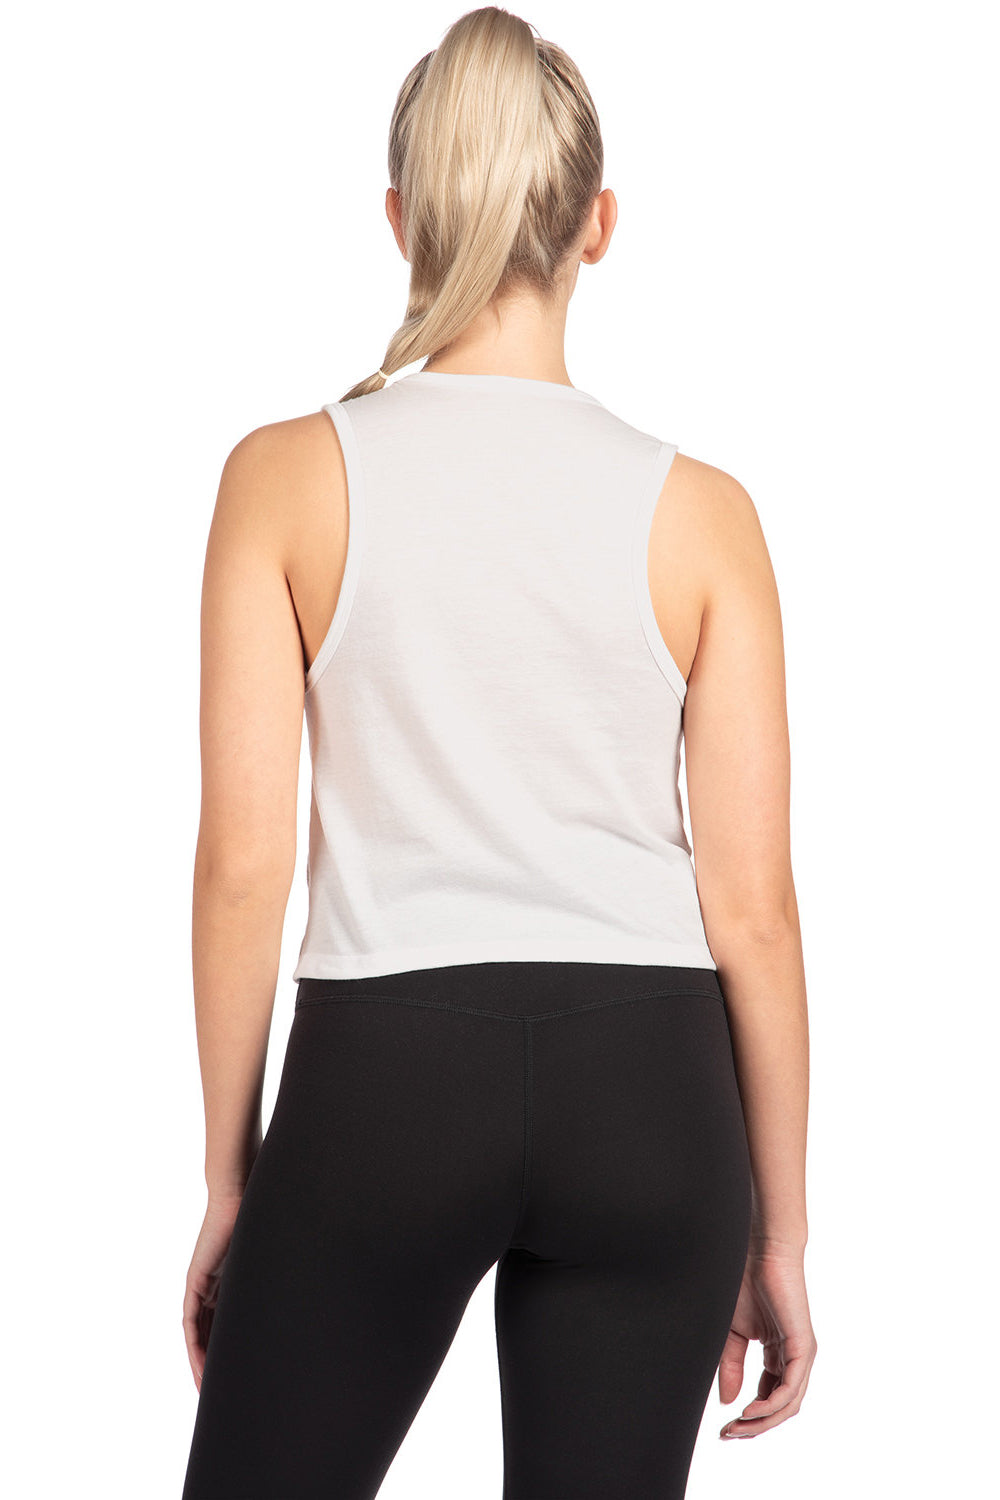 Next Level 5083 Womens Festival Cropped Tank Top White Back